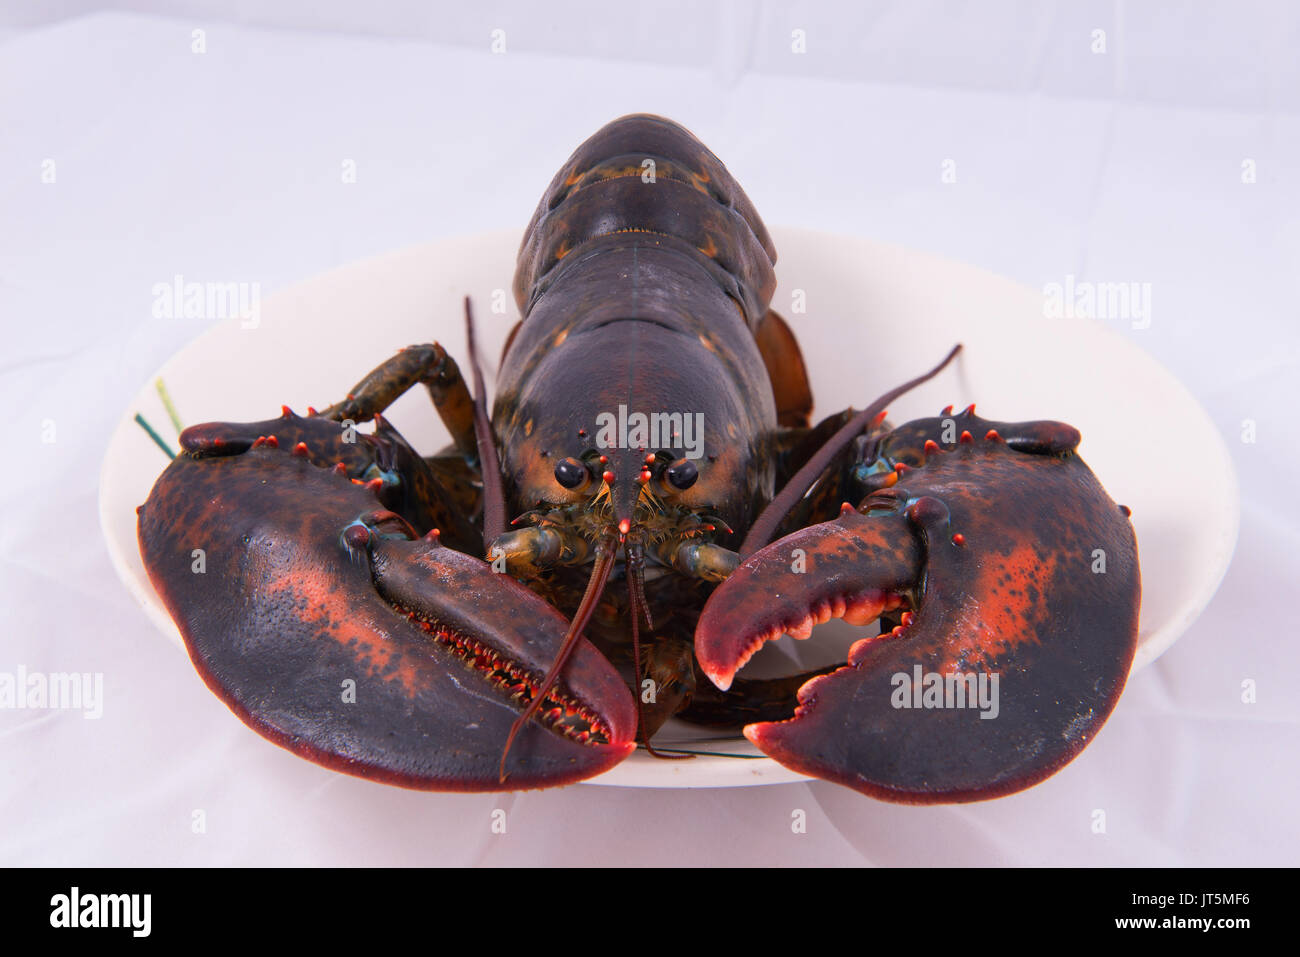 lobster from USA. Stock Photo